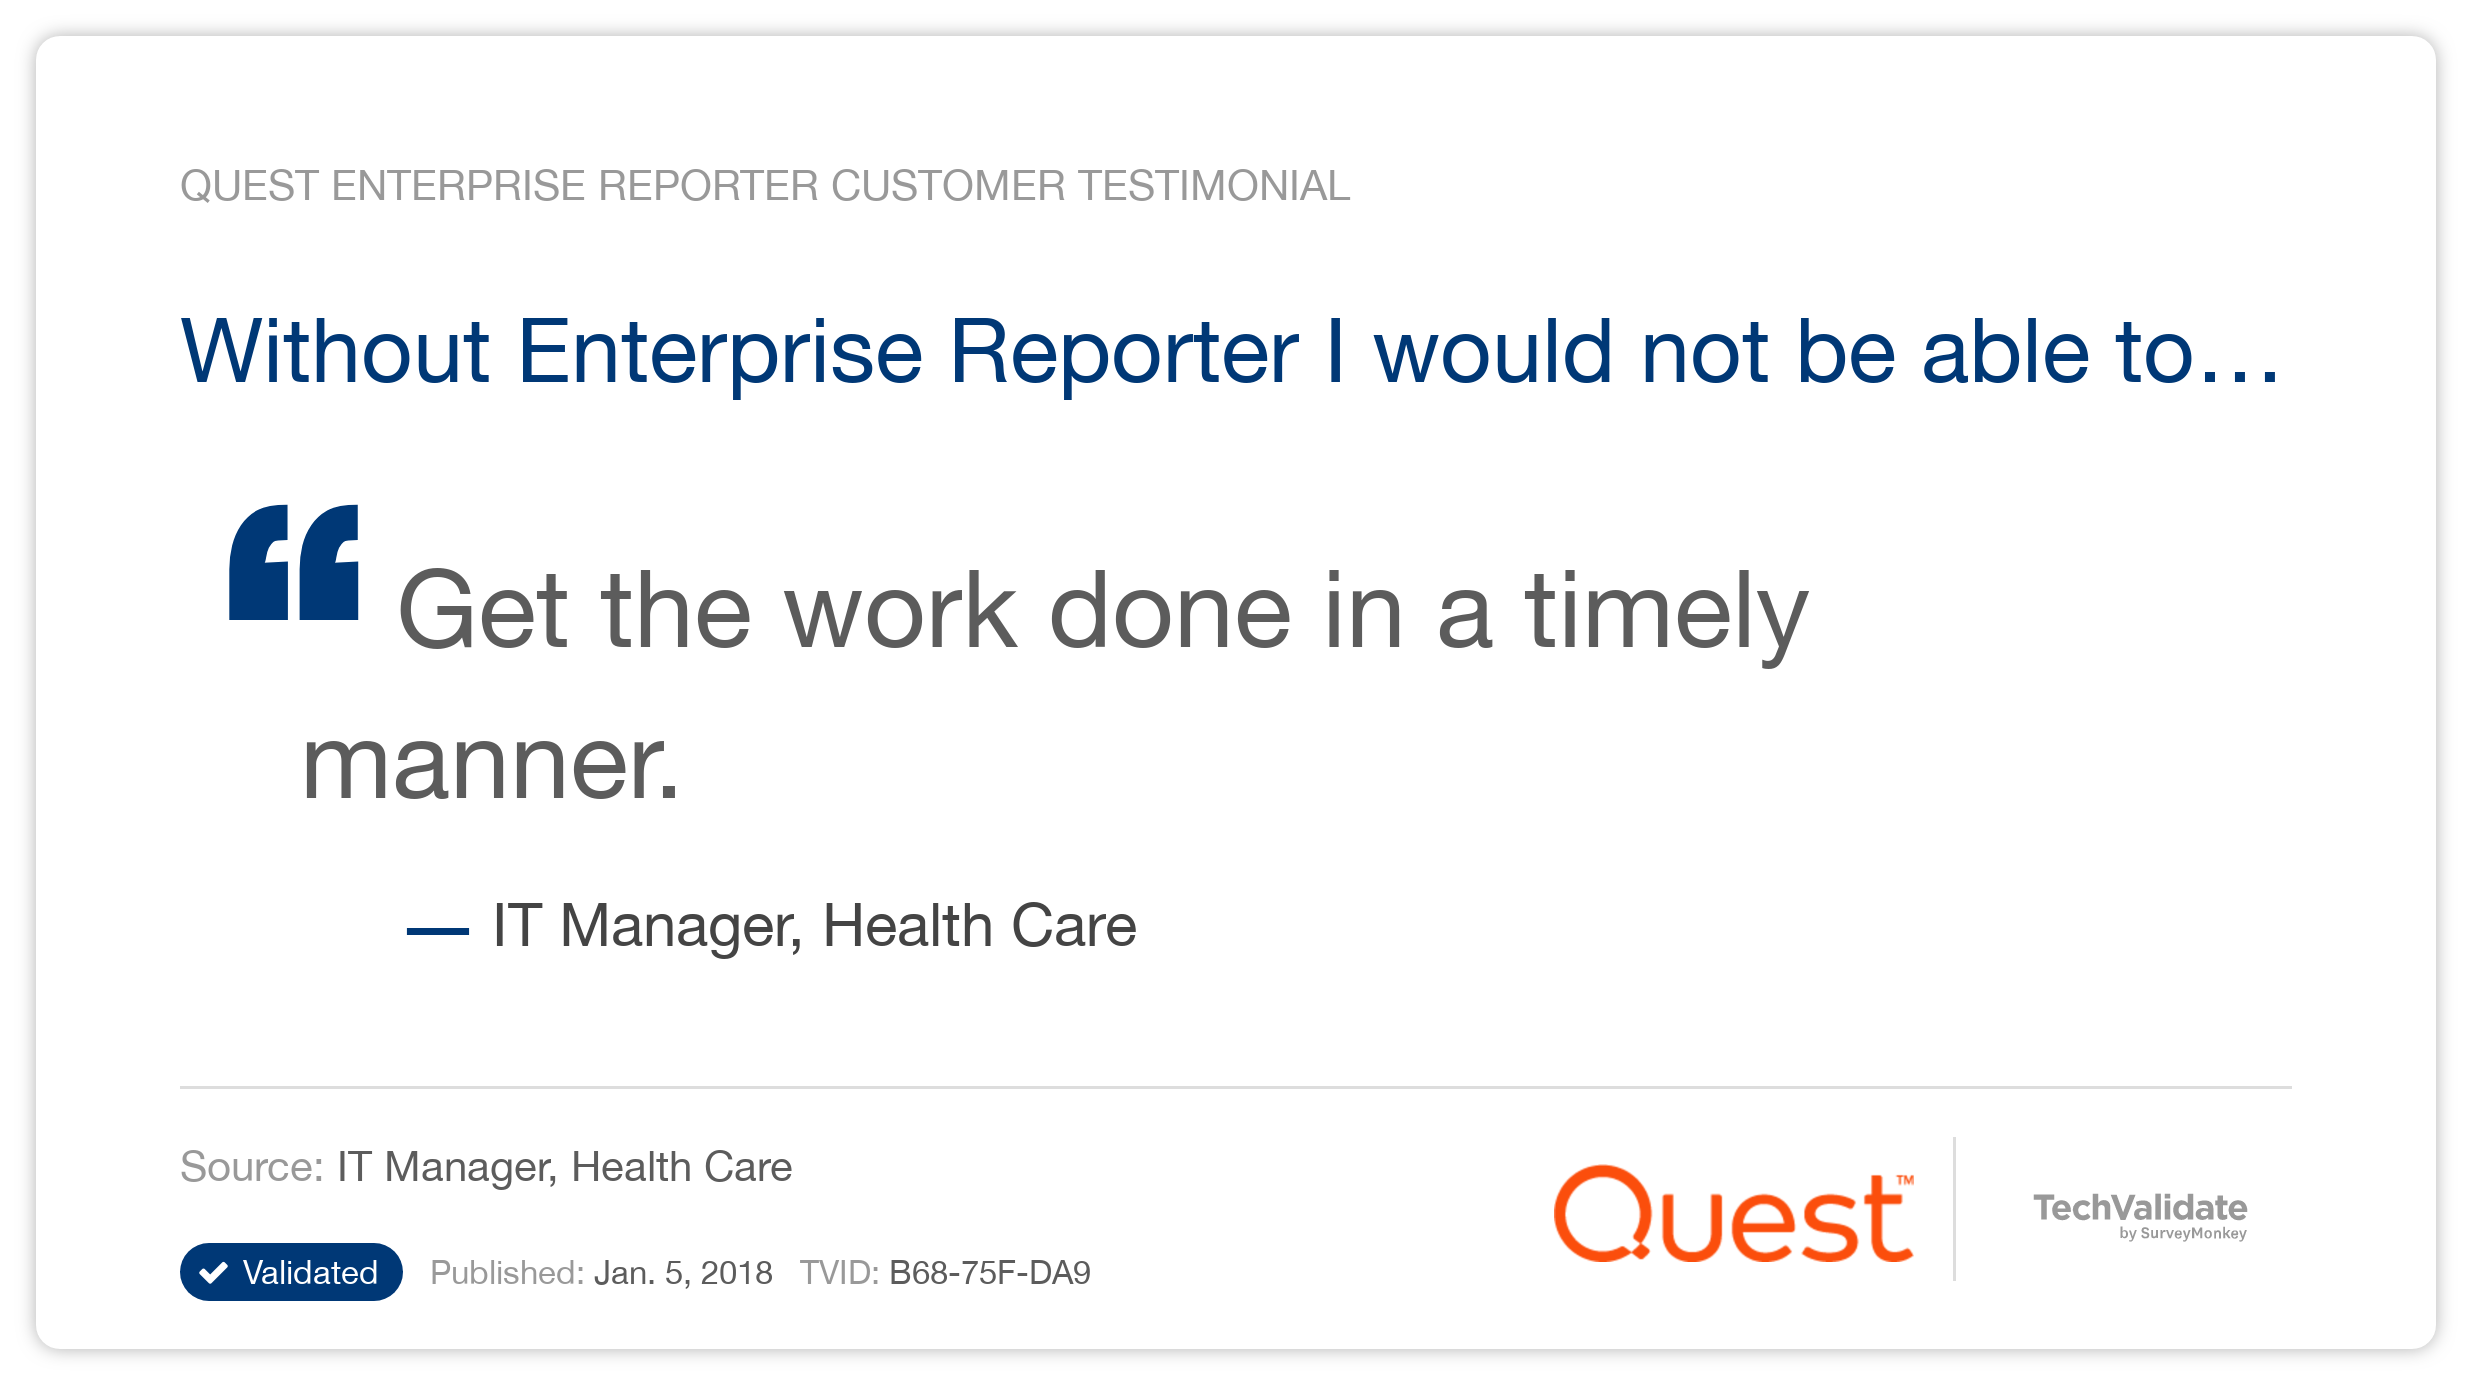 Without Enterprise Reporter I would not be able to...